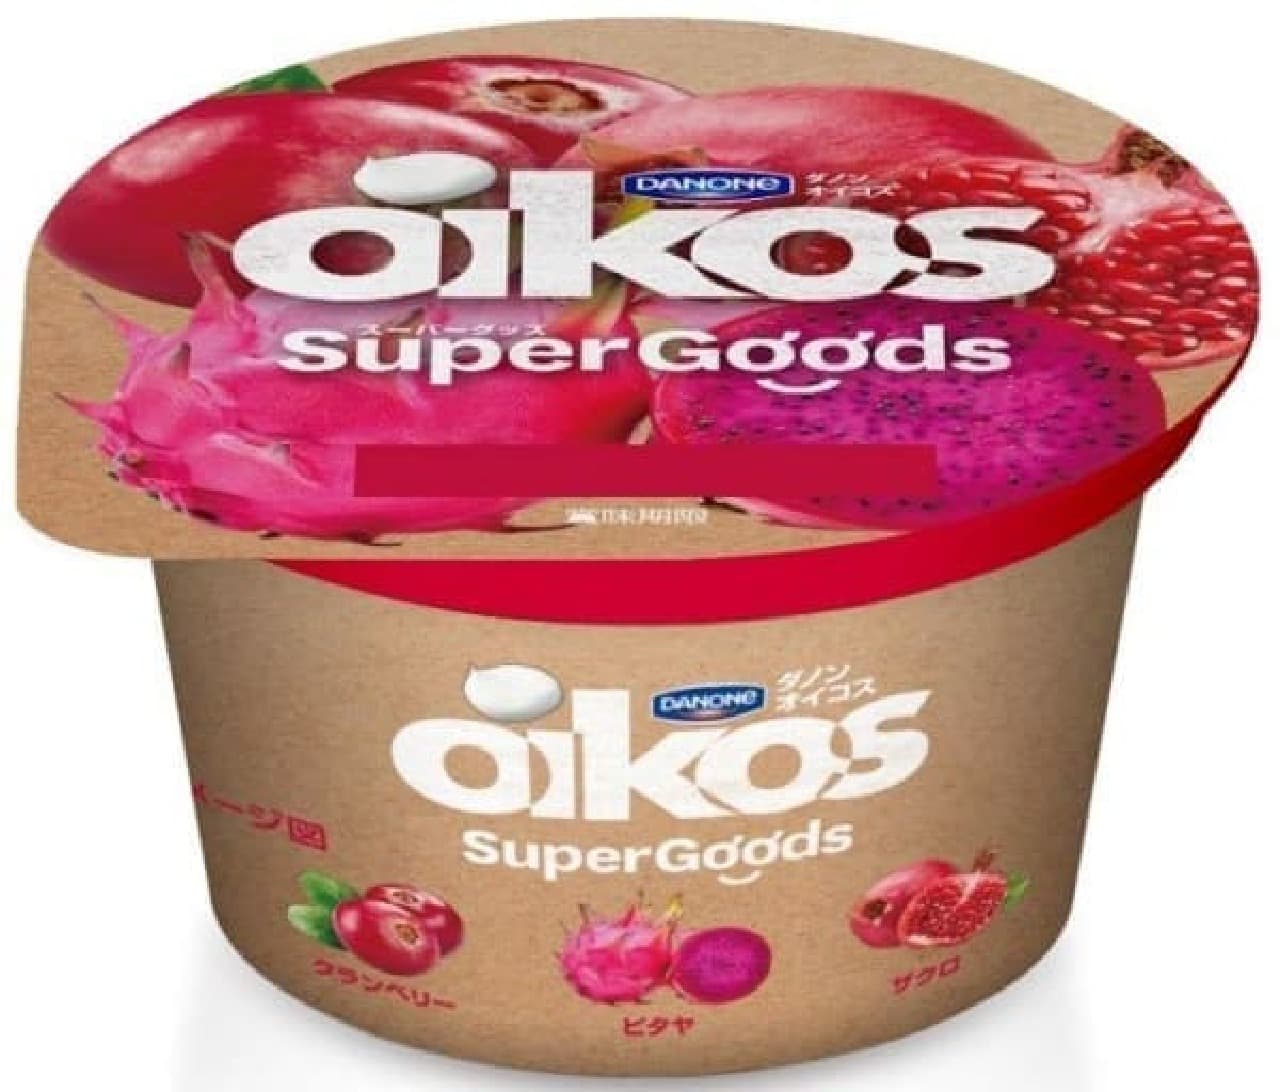 Contains 3 kinds of "red fruits"! "Danone Oikos Red Super Fruit Mix"